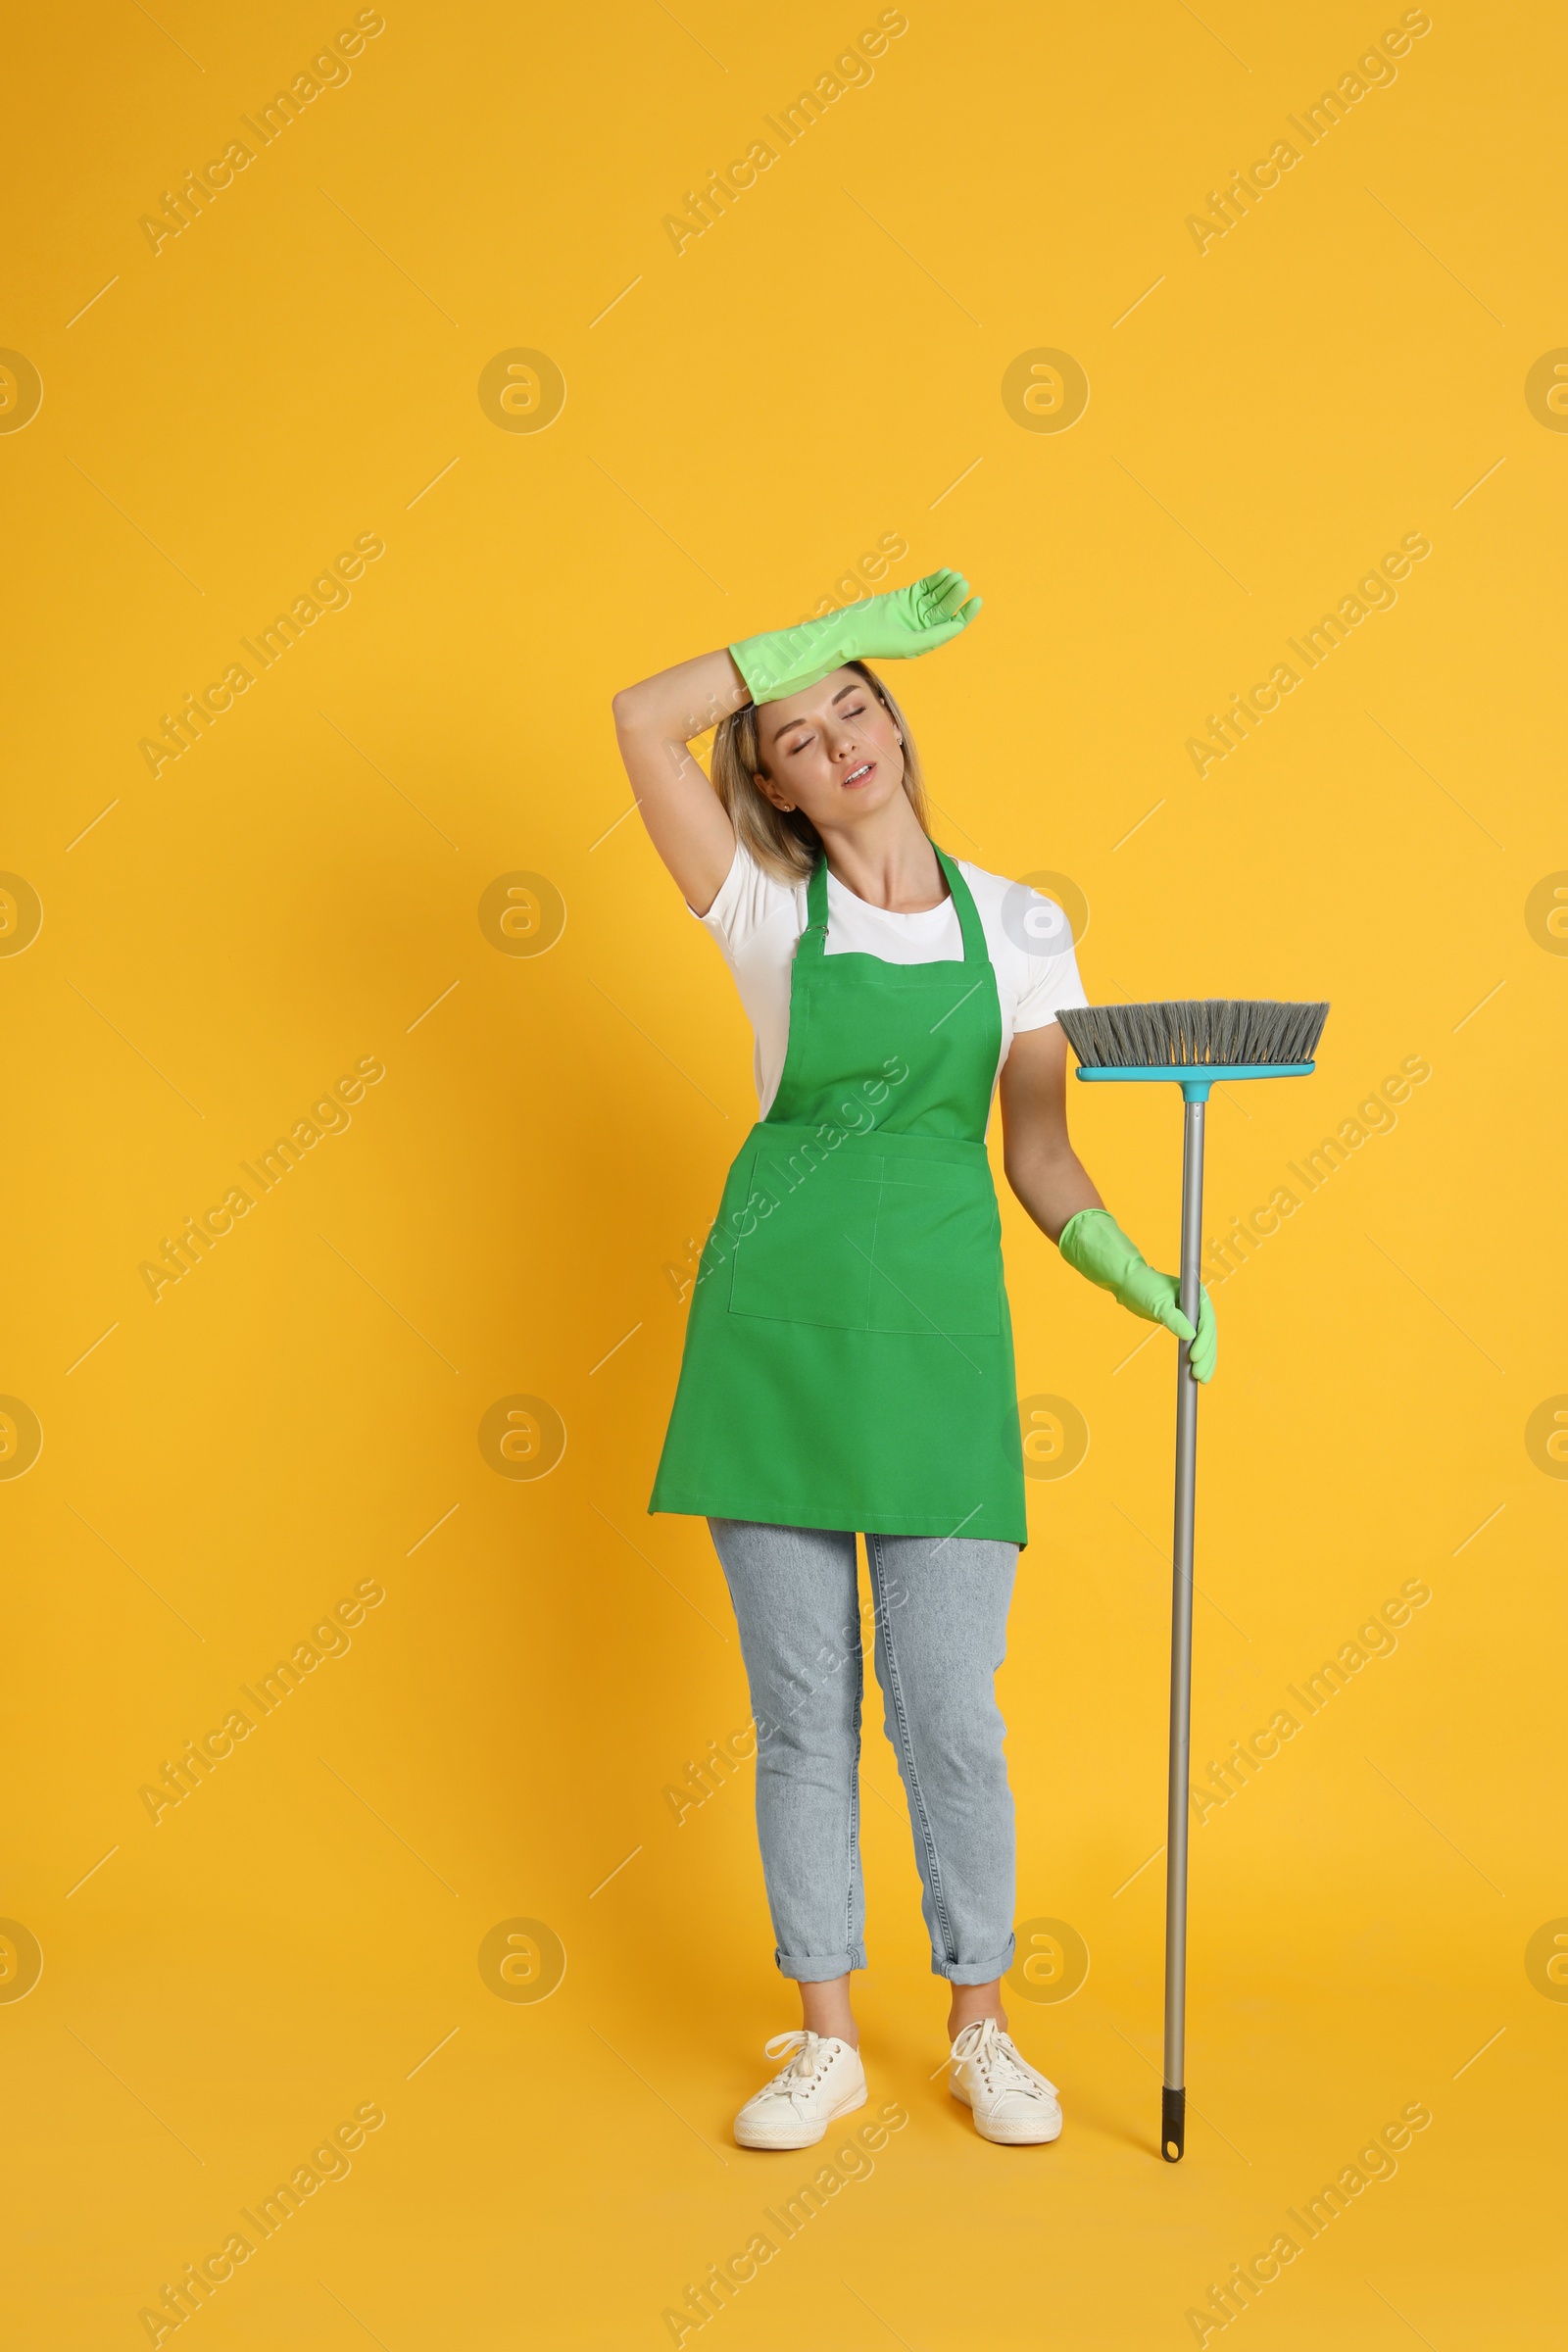 Photo of Tired young woman with broom on orange background